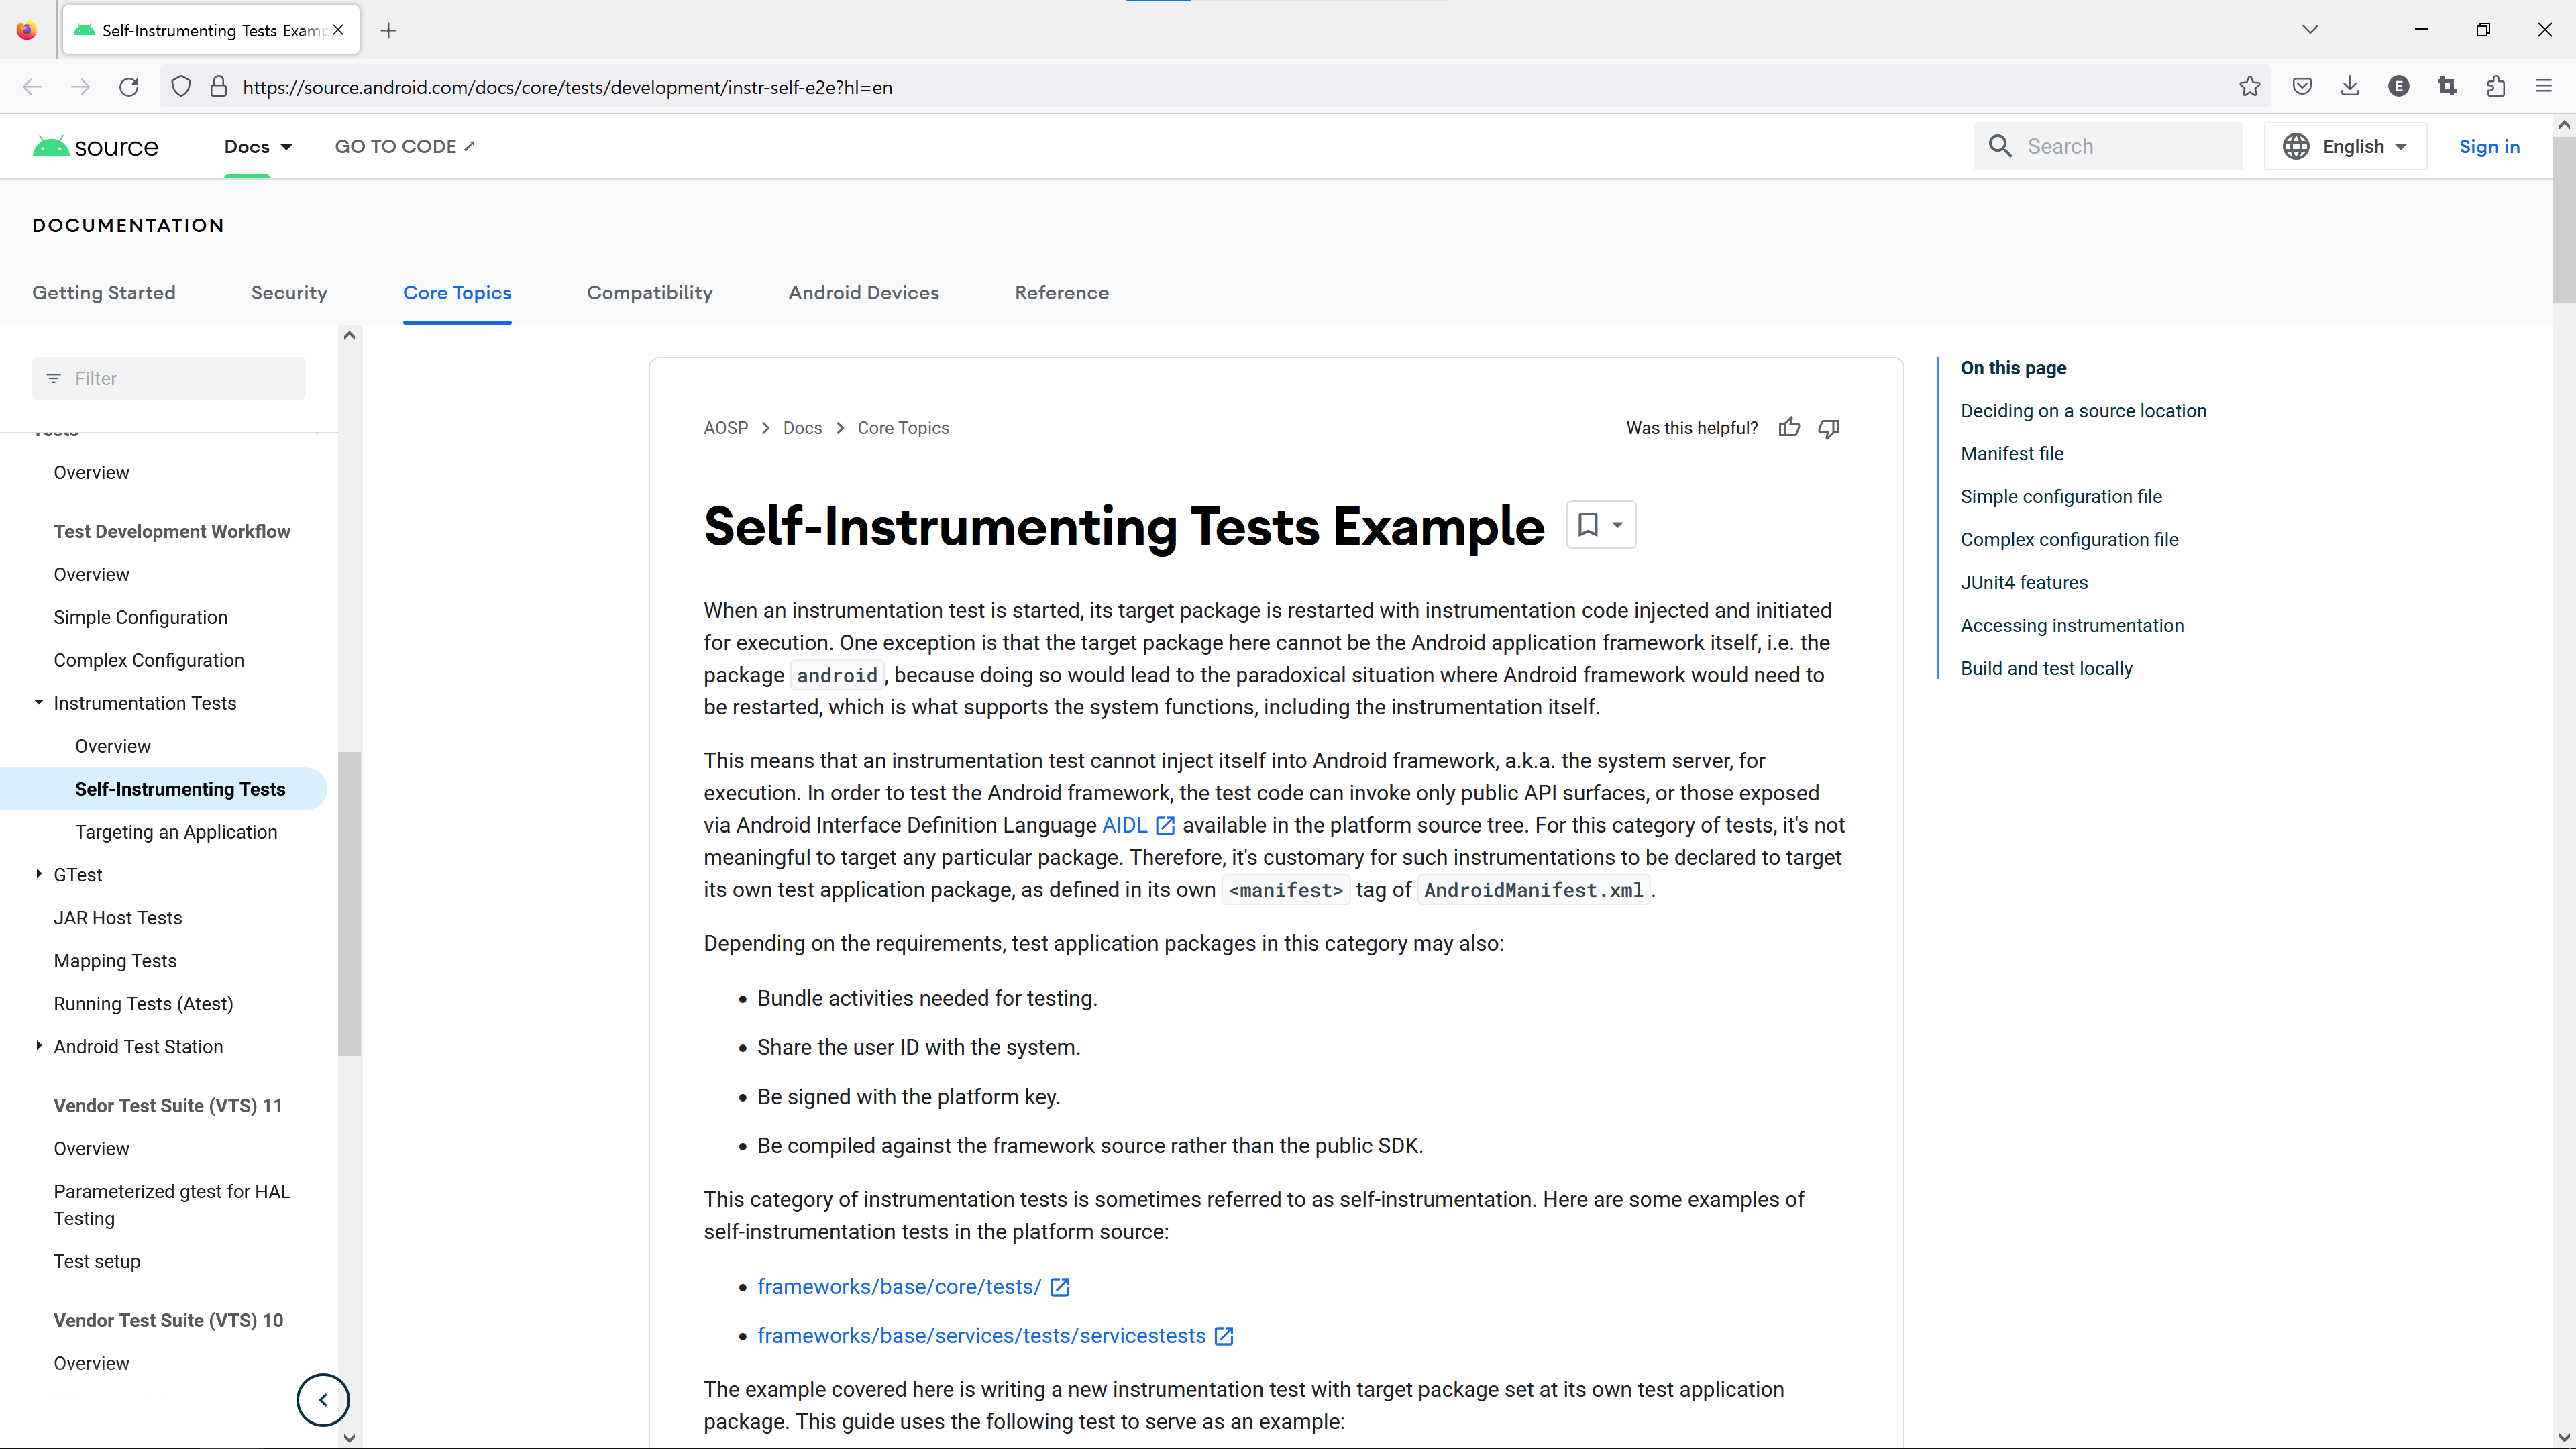 Self-Instrumenting Tests Example